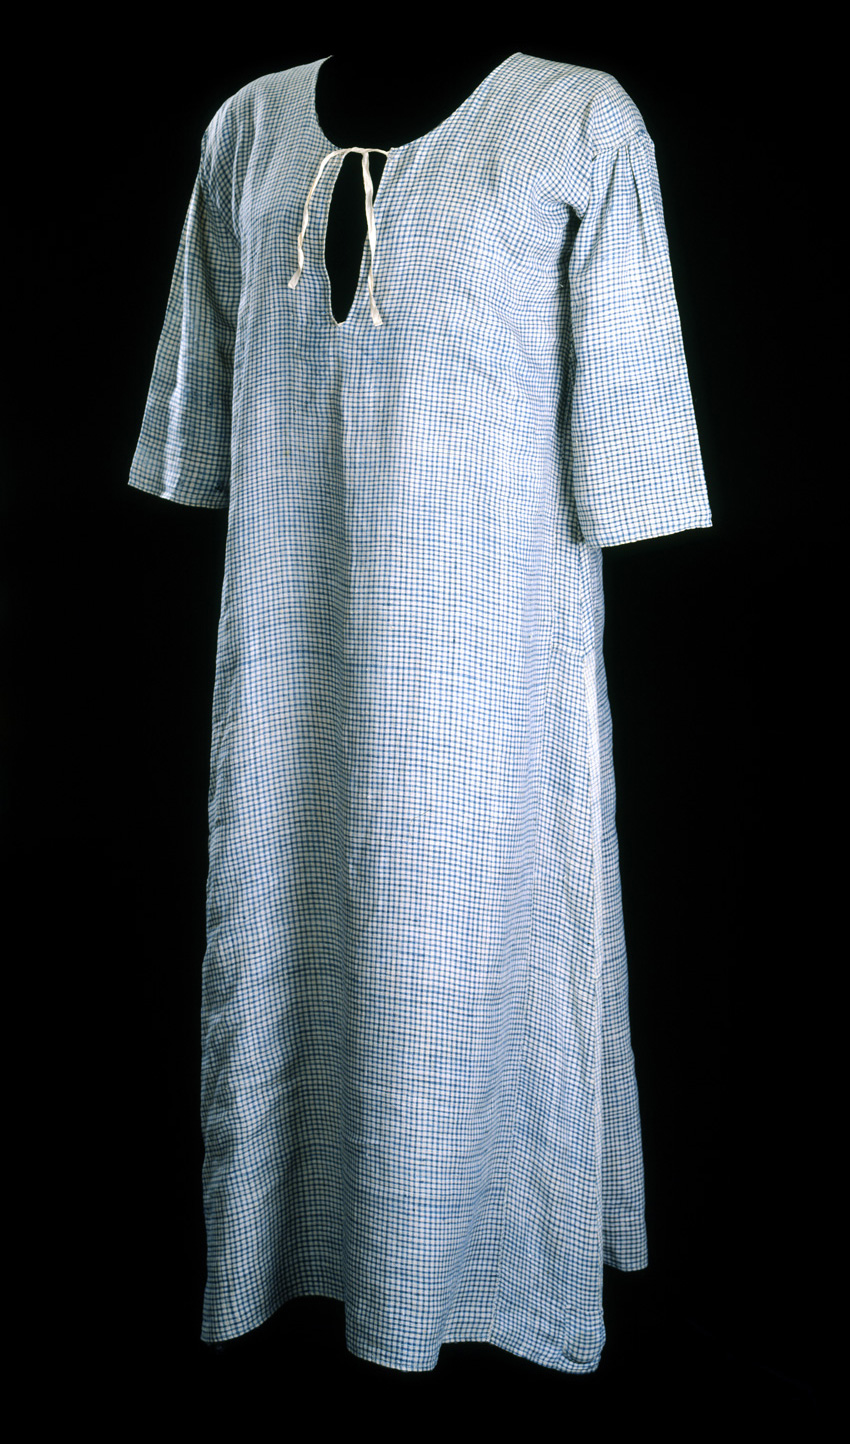 Blue and white printed bathing gown with strings to close slit at neck.